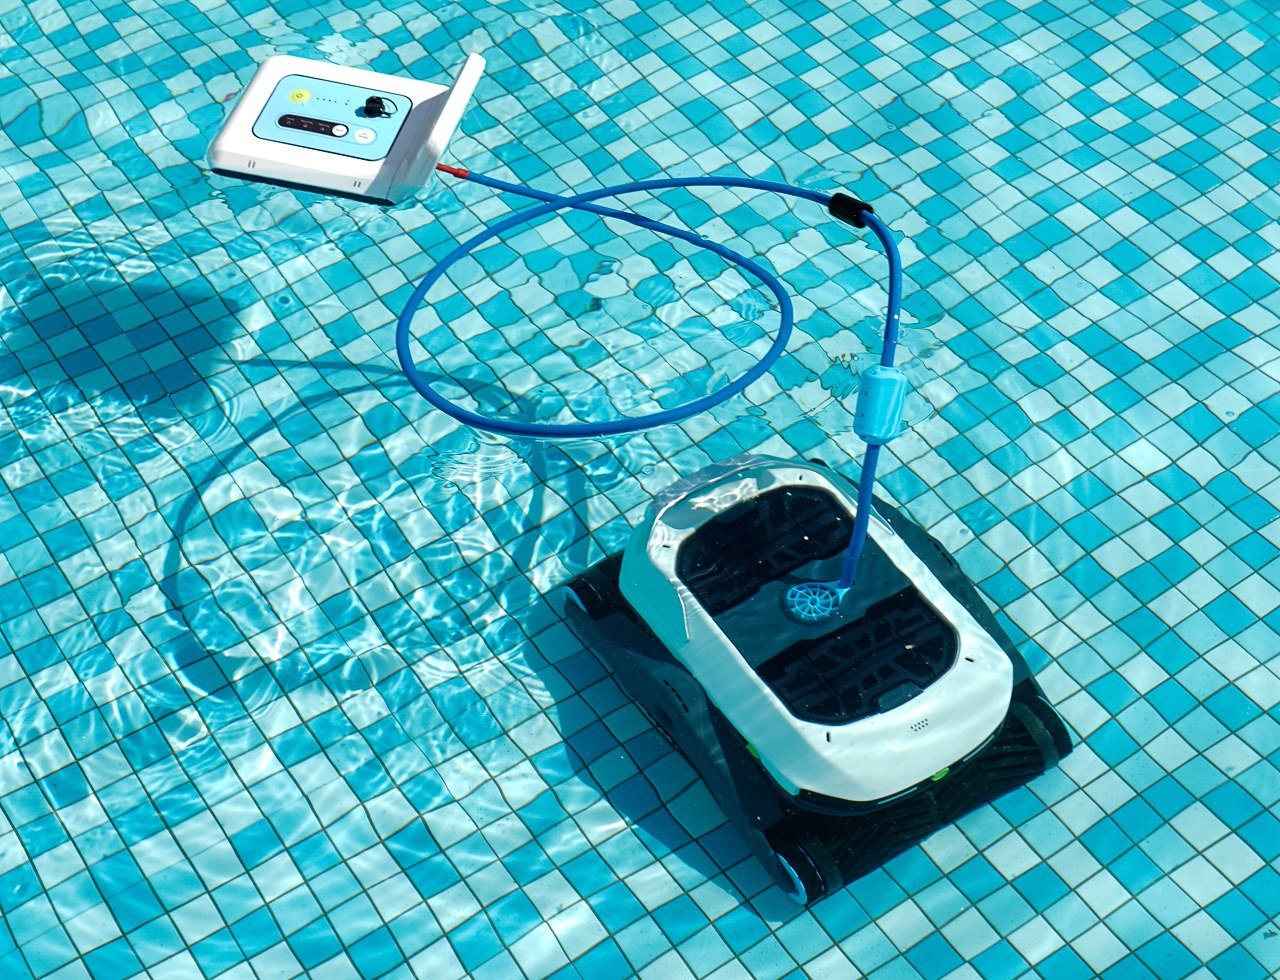 This intelligent pool cleaner creates an ultrasonic map of your swimming pool and cleans its floor, walls, and stairs